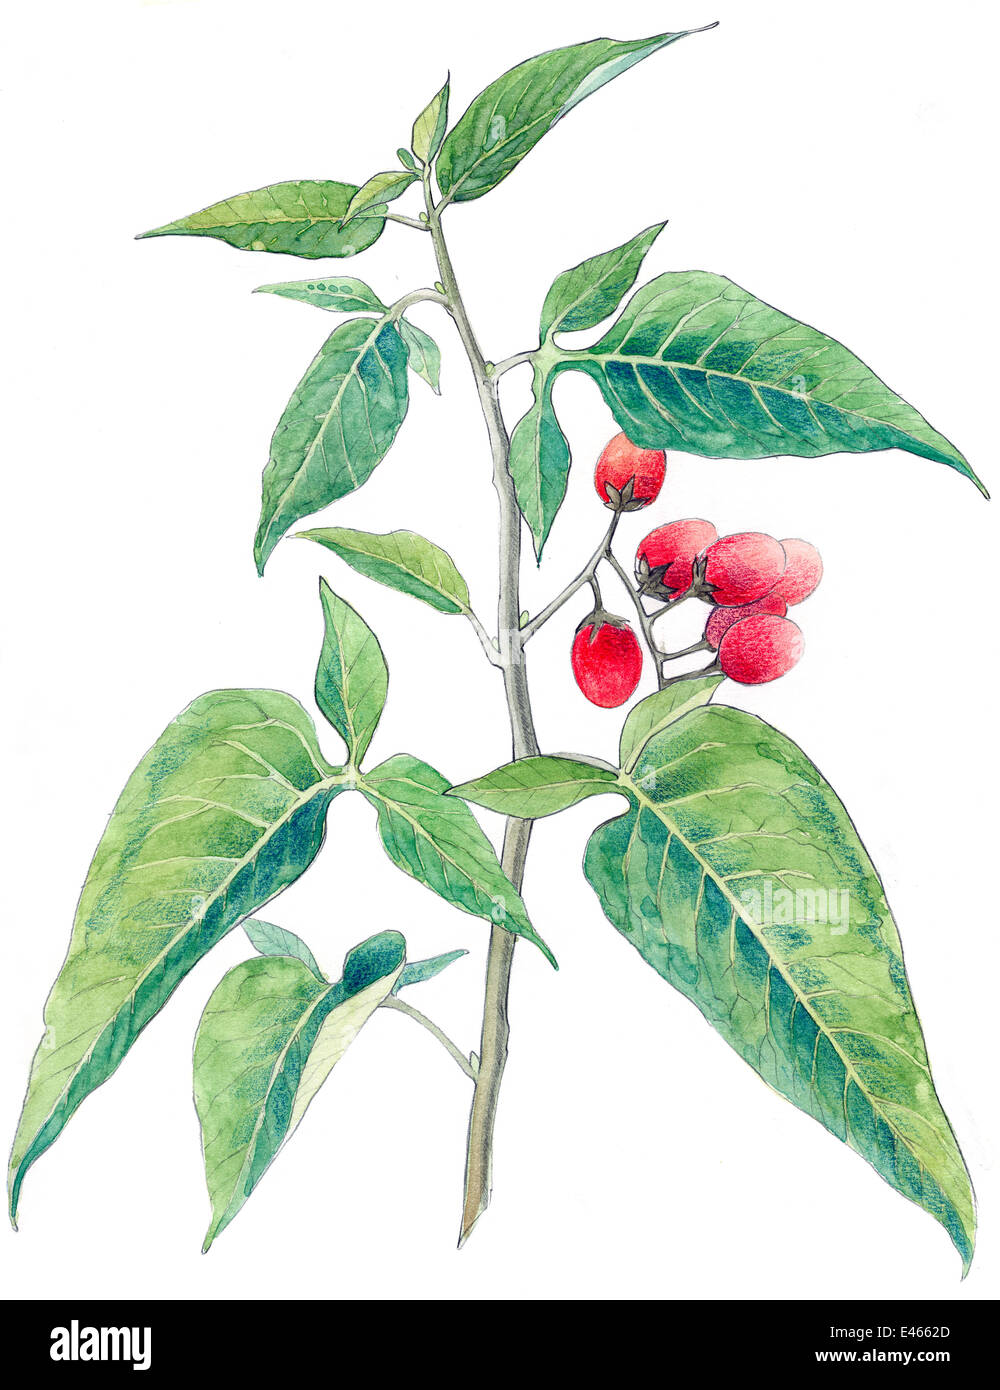 Illustration of Bittersweet (Solanum dulcamara). Detail of leaves and fruit. Pencil and watercolor painting. Stock Photo